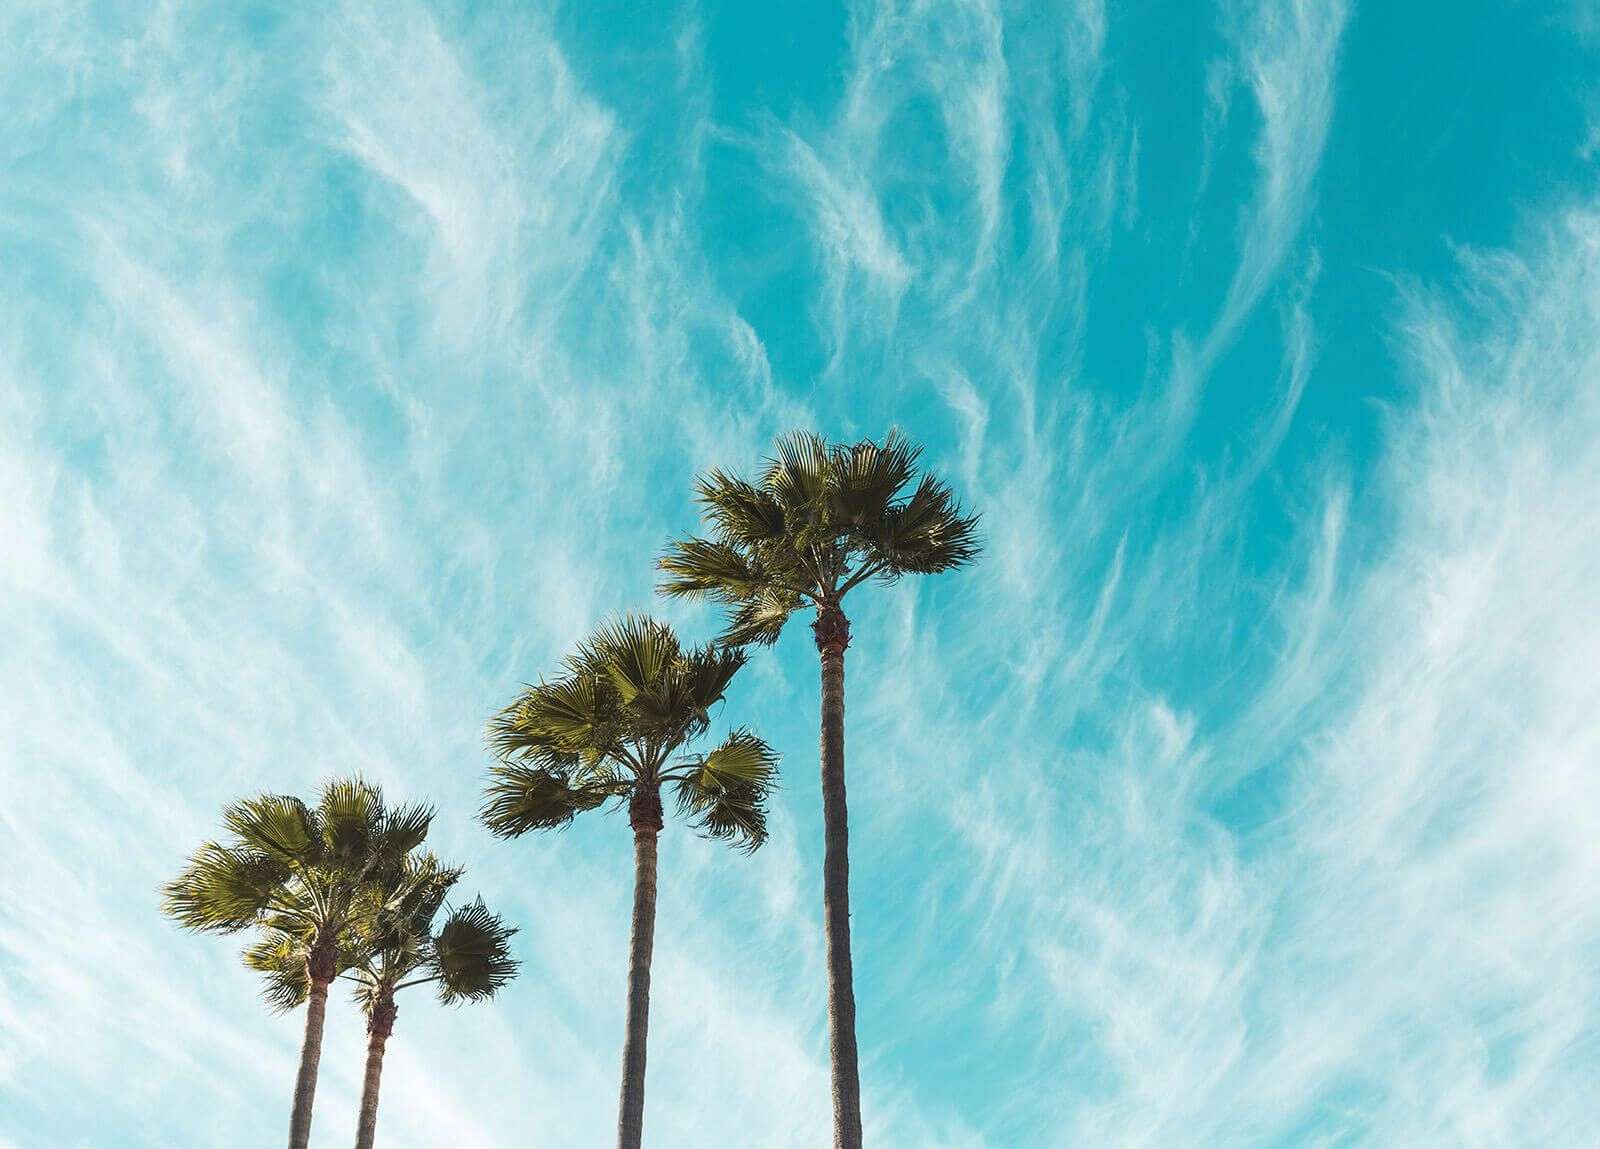 Sky and Palm Trees online puzzle